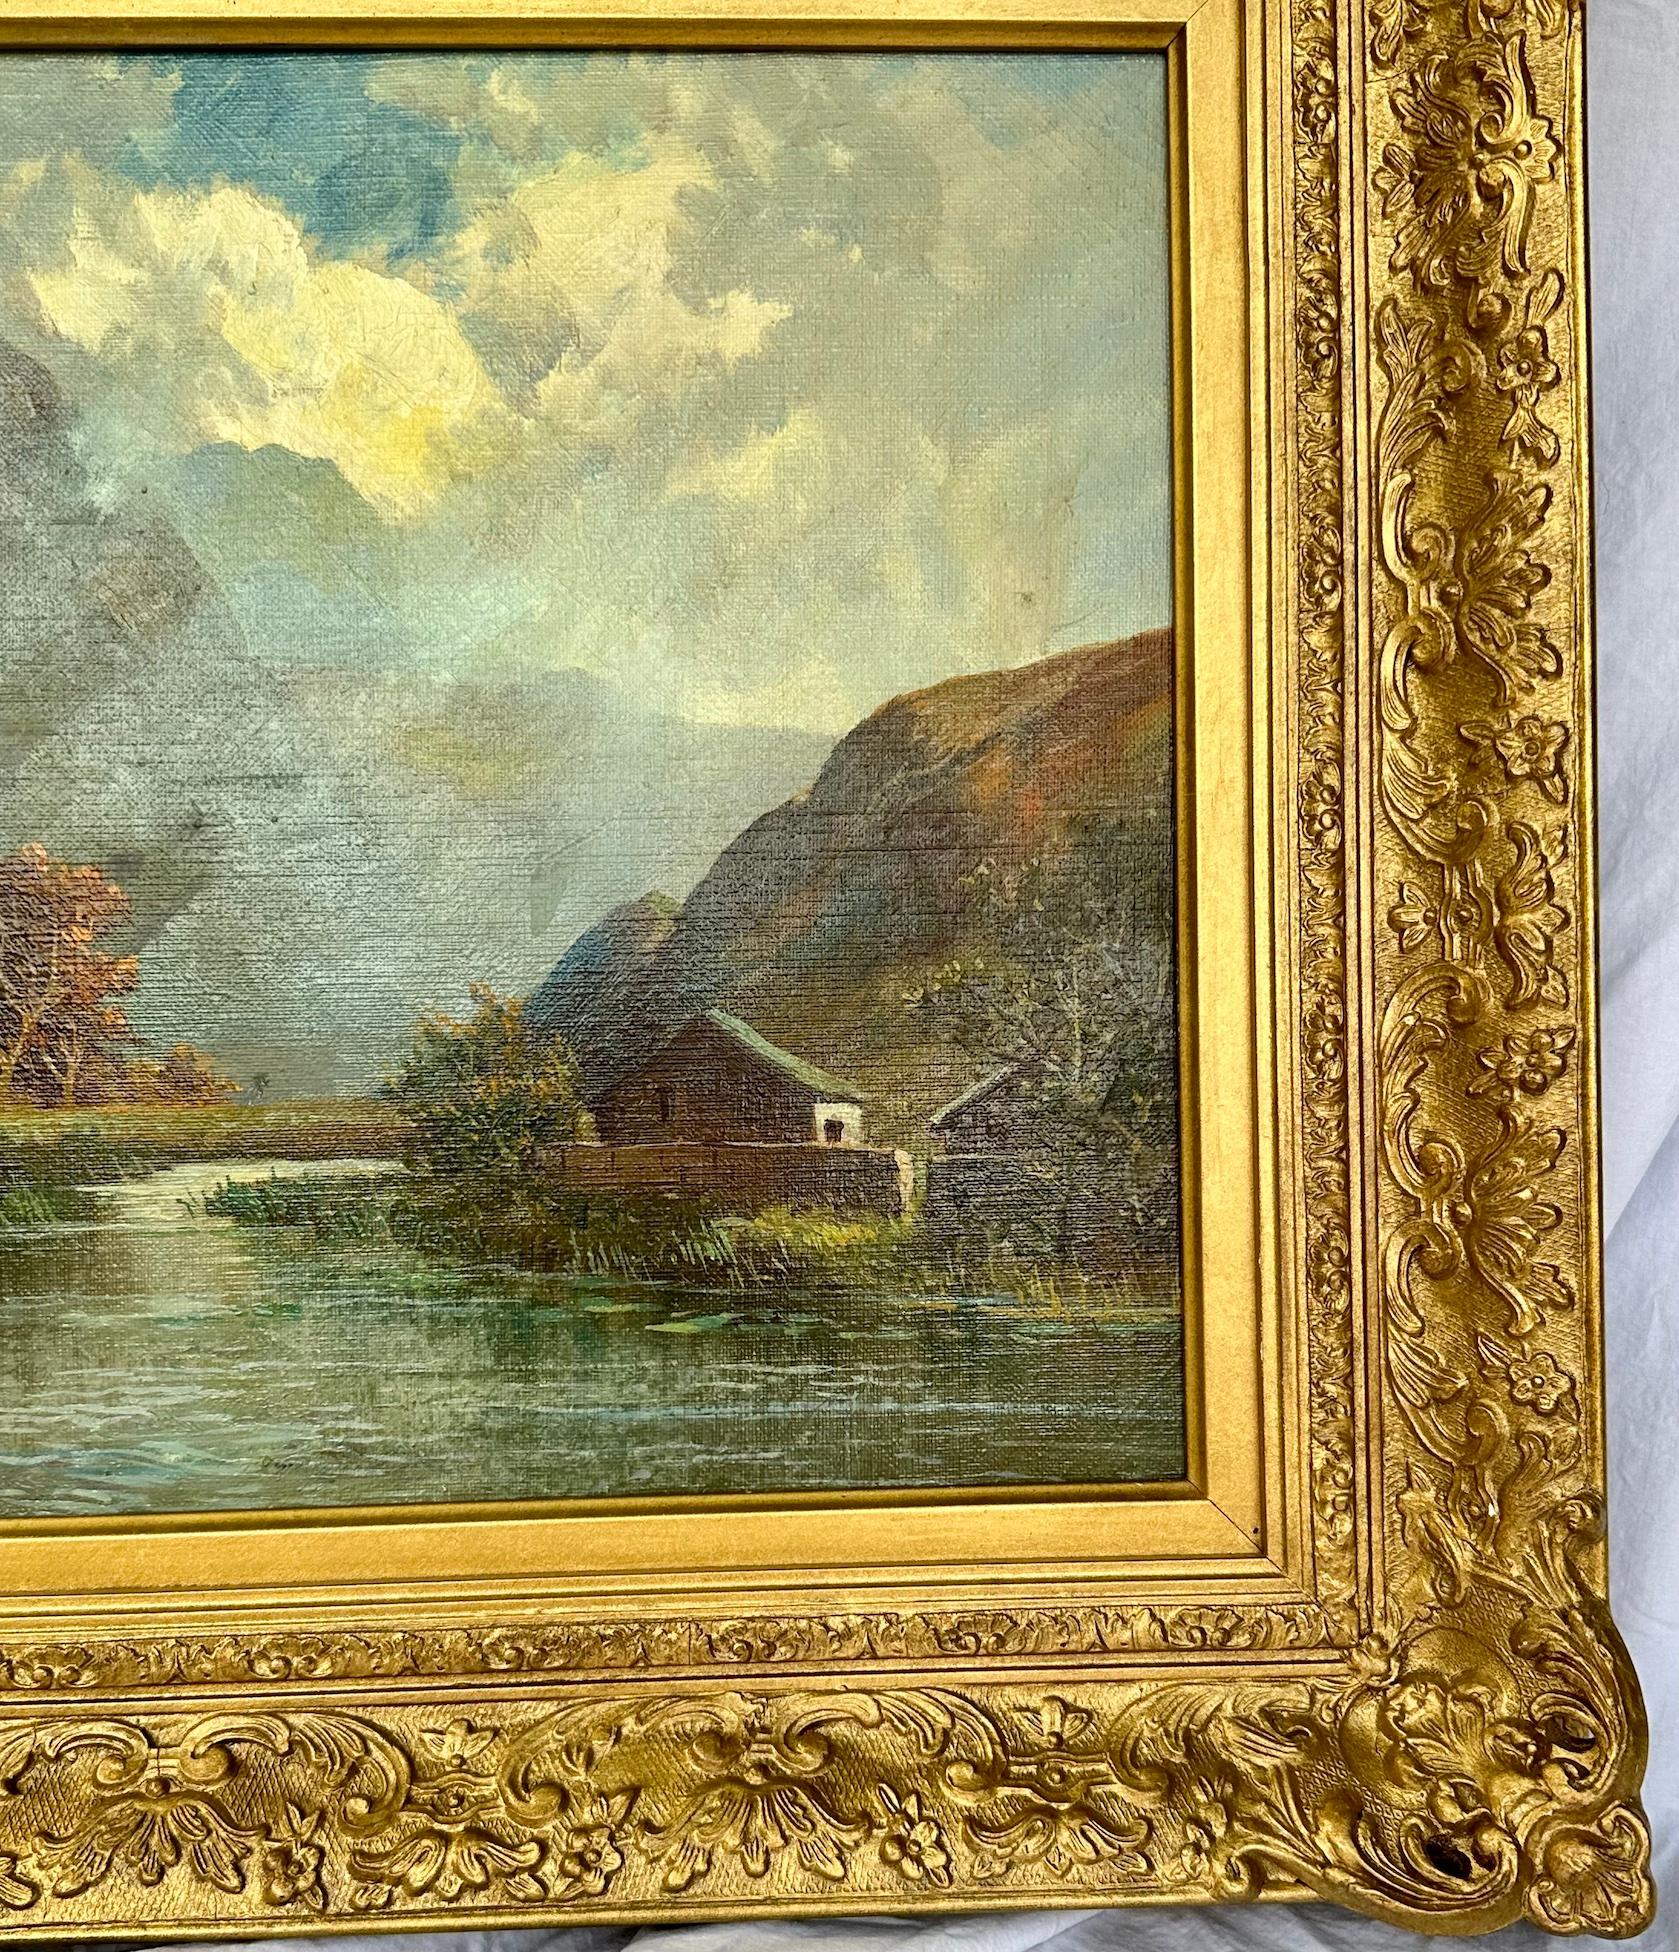 Francis Jamieson was a painter in oil and watercolor of highland landscapes and coastal scenes. (The work of this highly prolific artist is curious since the oils and watercolors have two quite distinctive styles and subject matter. The oil